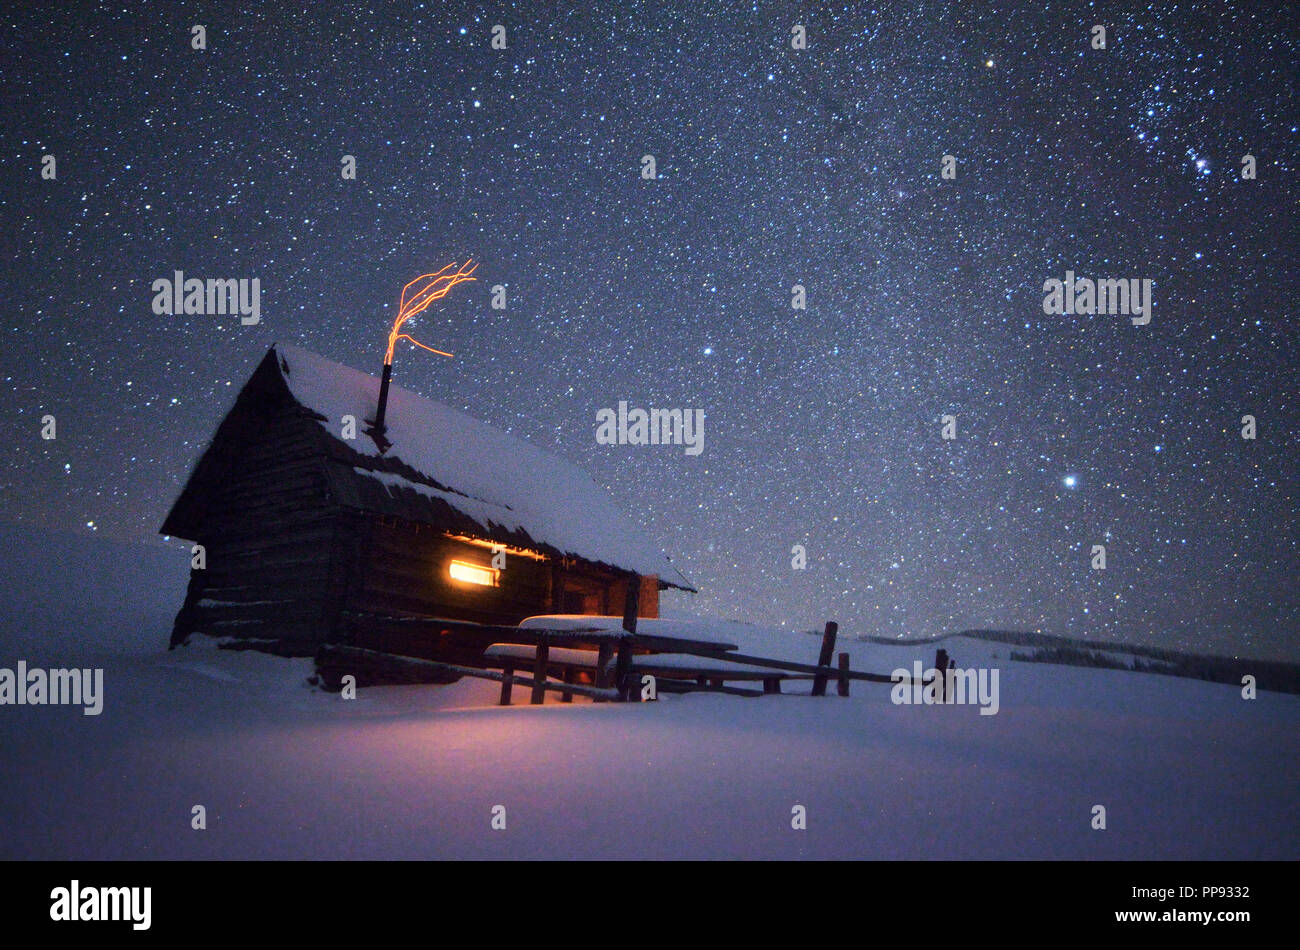 Night with stars. Christmas landscape. Wooden house in the mountain village Stock Photo